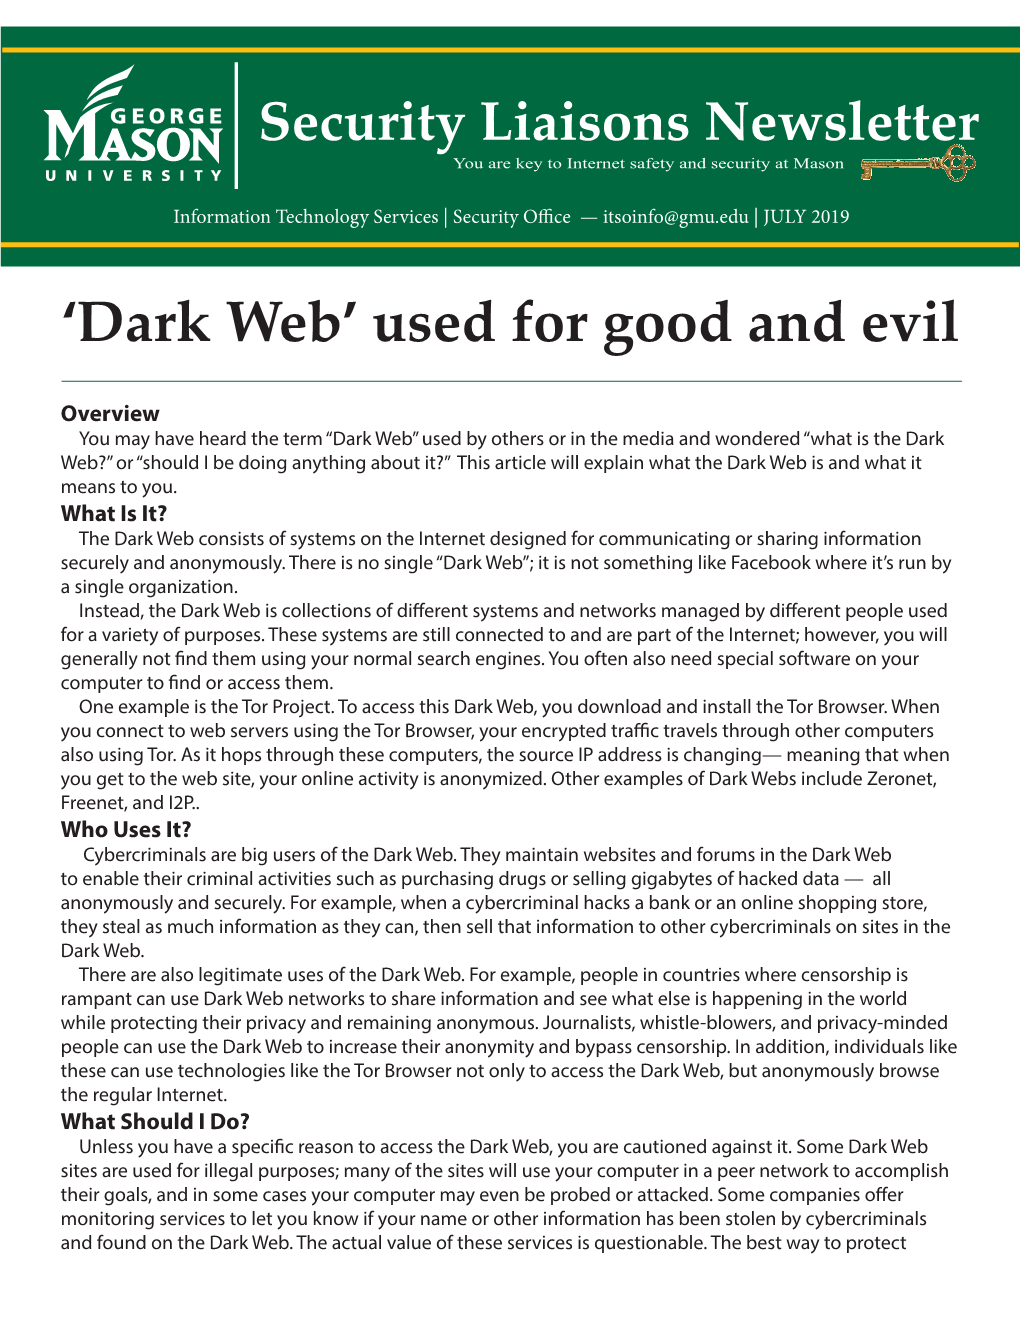 'Dark Web' Used for Good and Evil